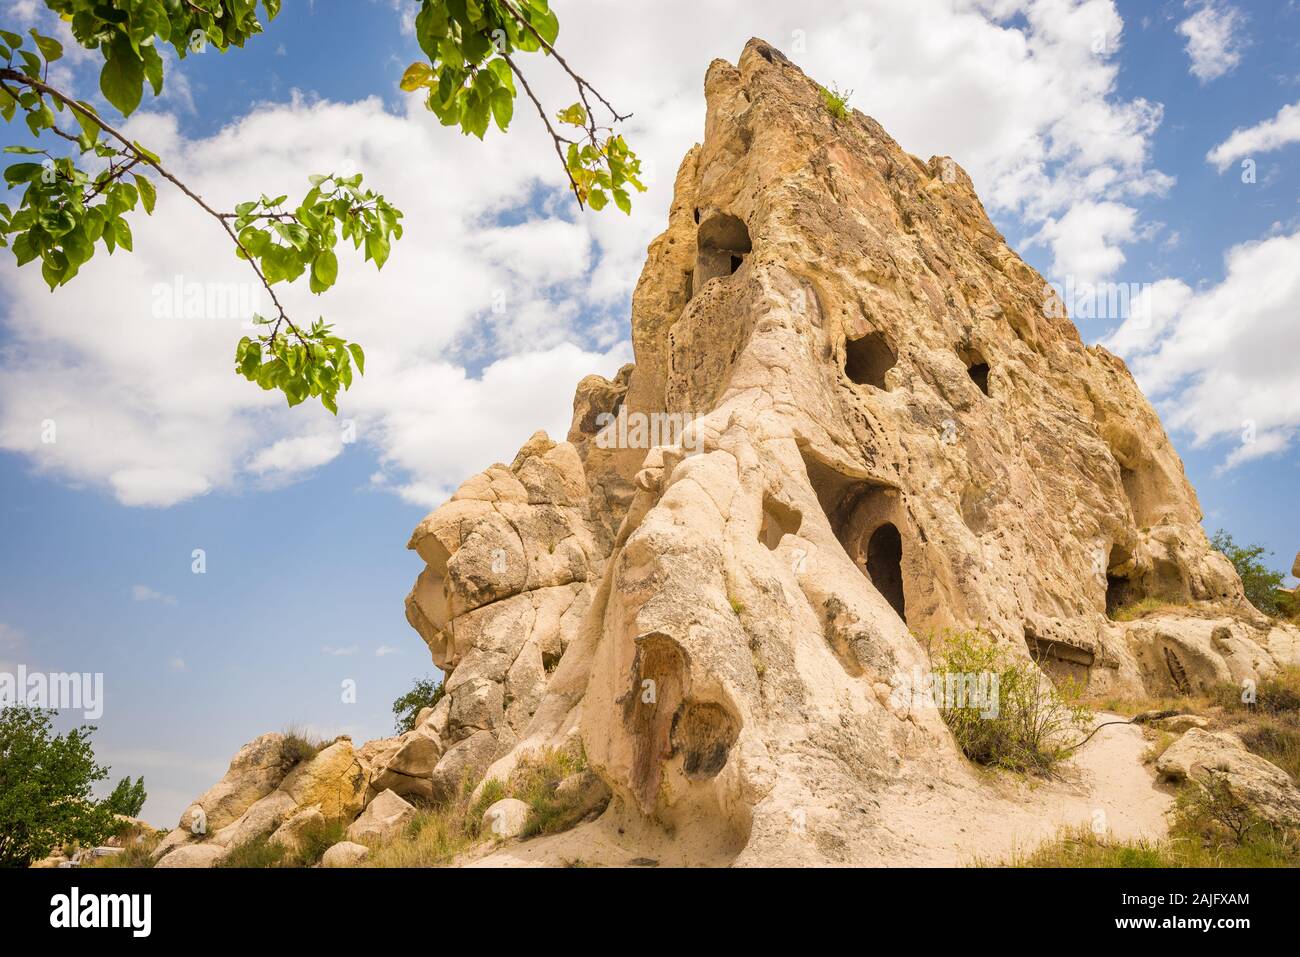 Dwelling carved out of stone at Goreme Open Air Museum (UNESCO heritage site) in Cappadocia, turkey Stock Photo